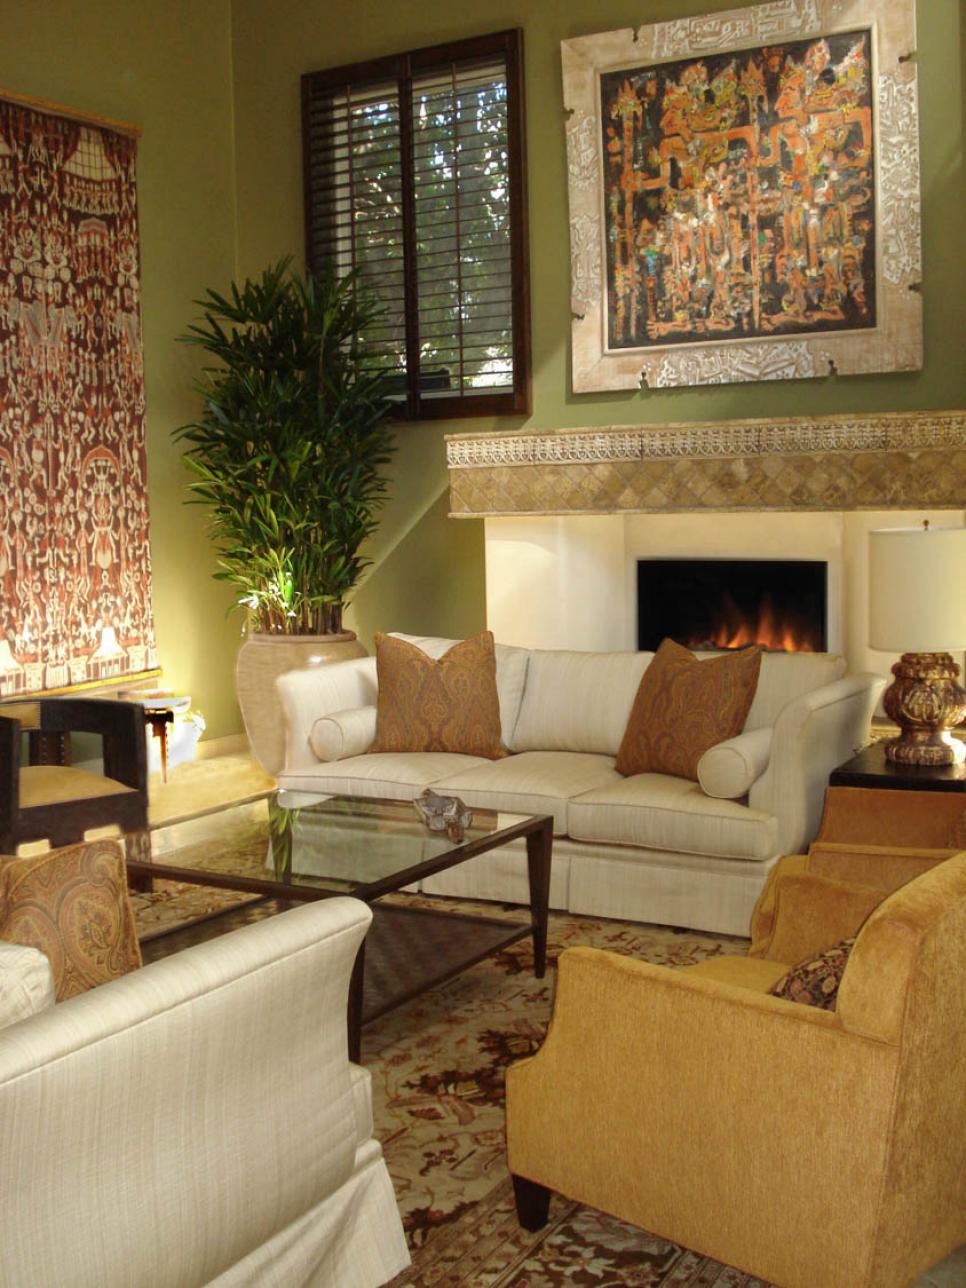 Green Living Room With Beige Fireplace and Sofa